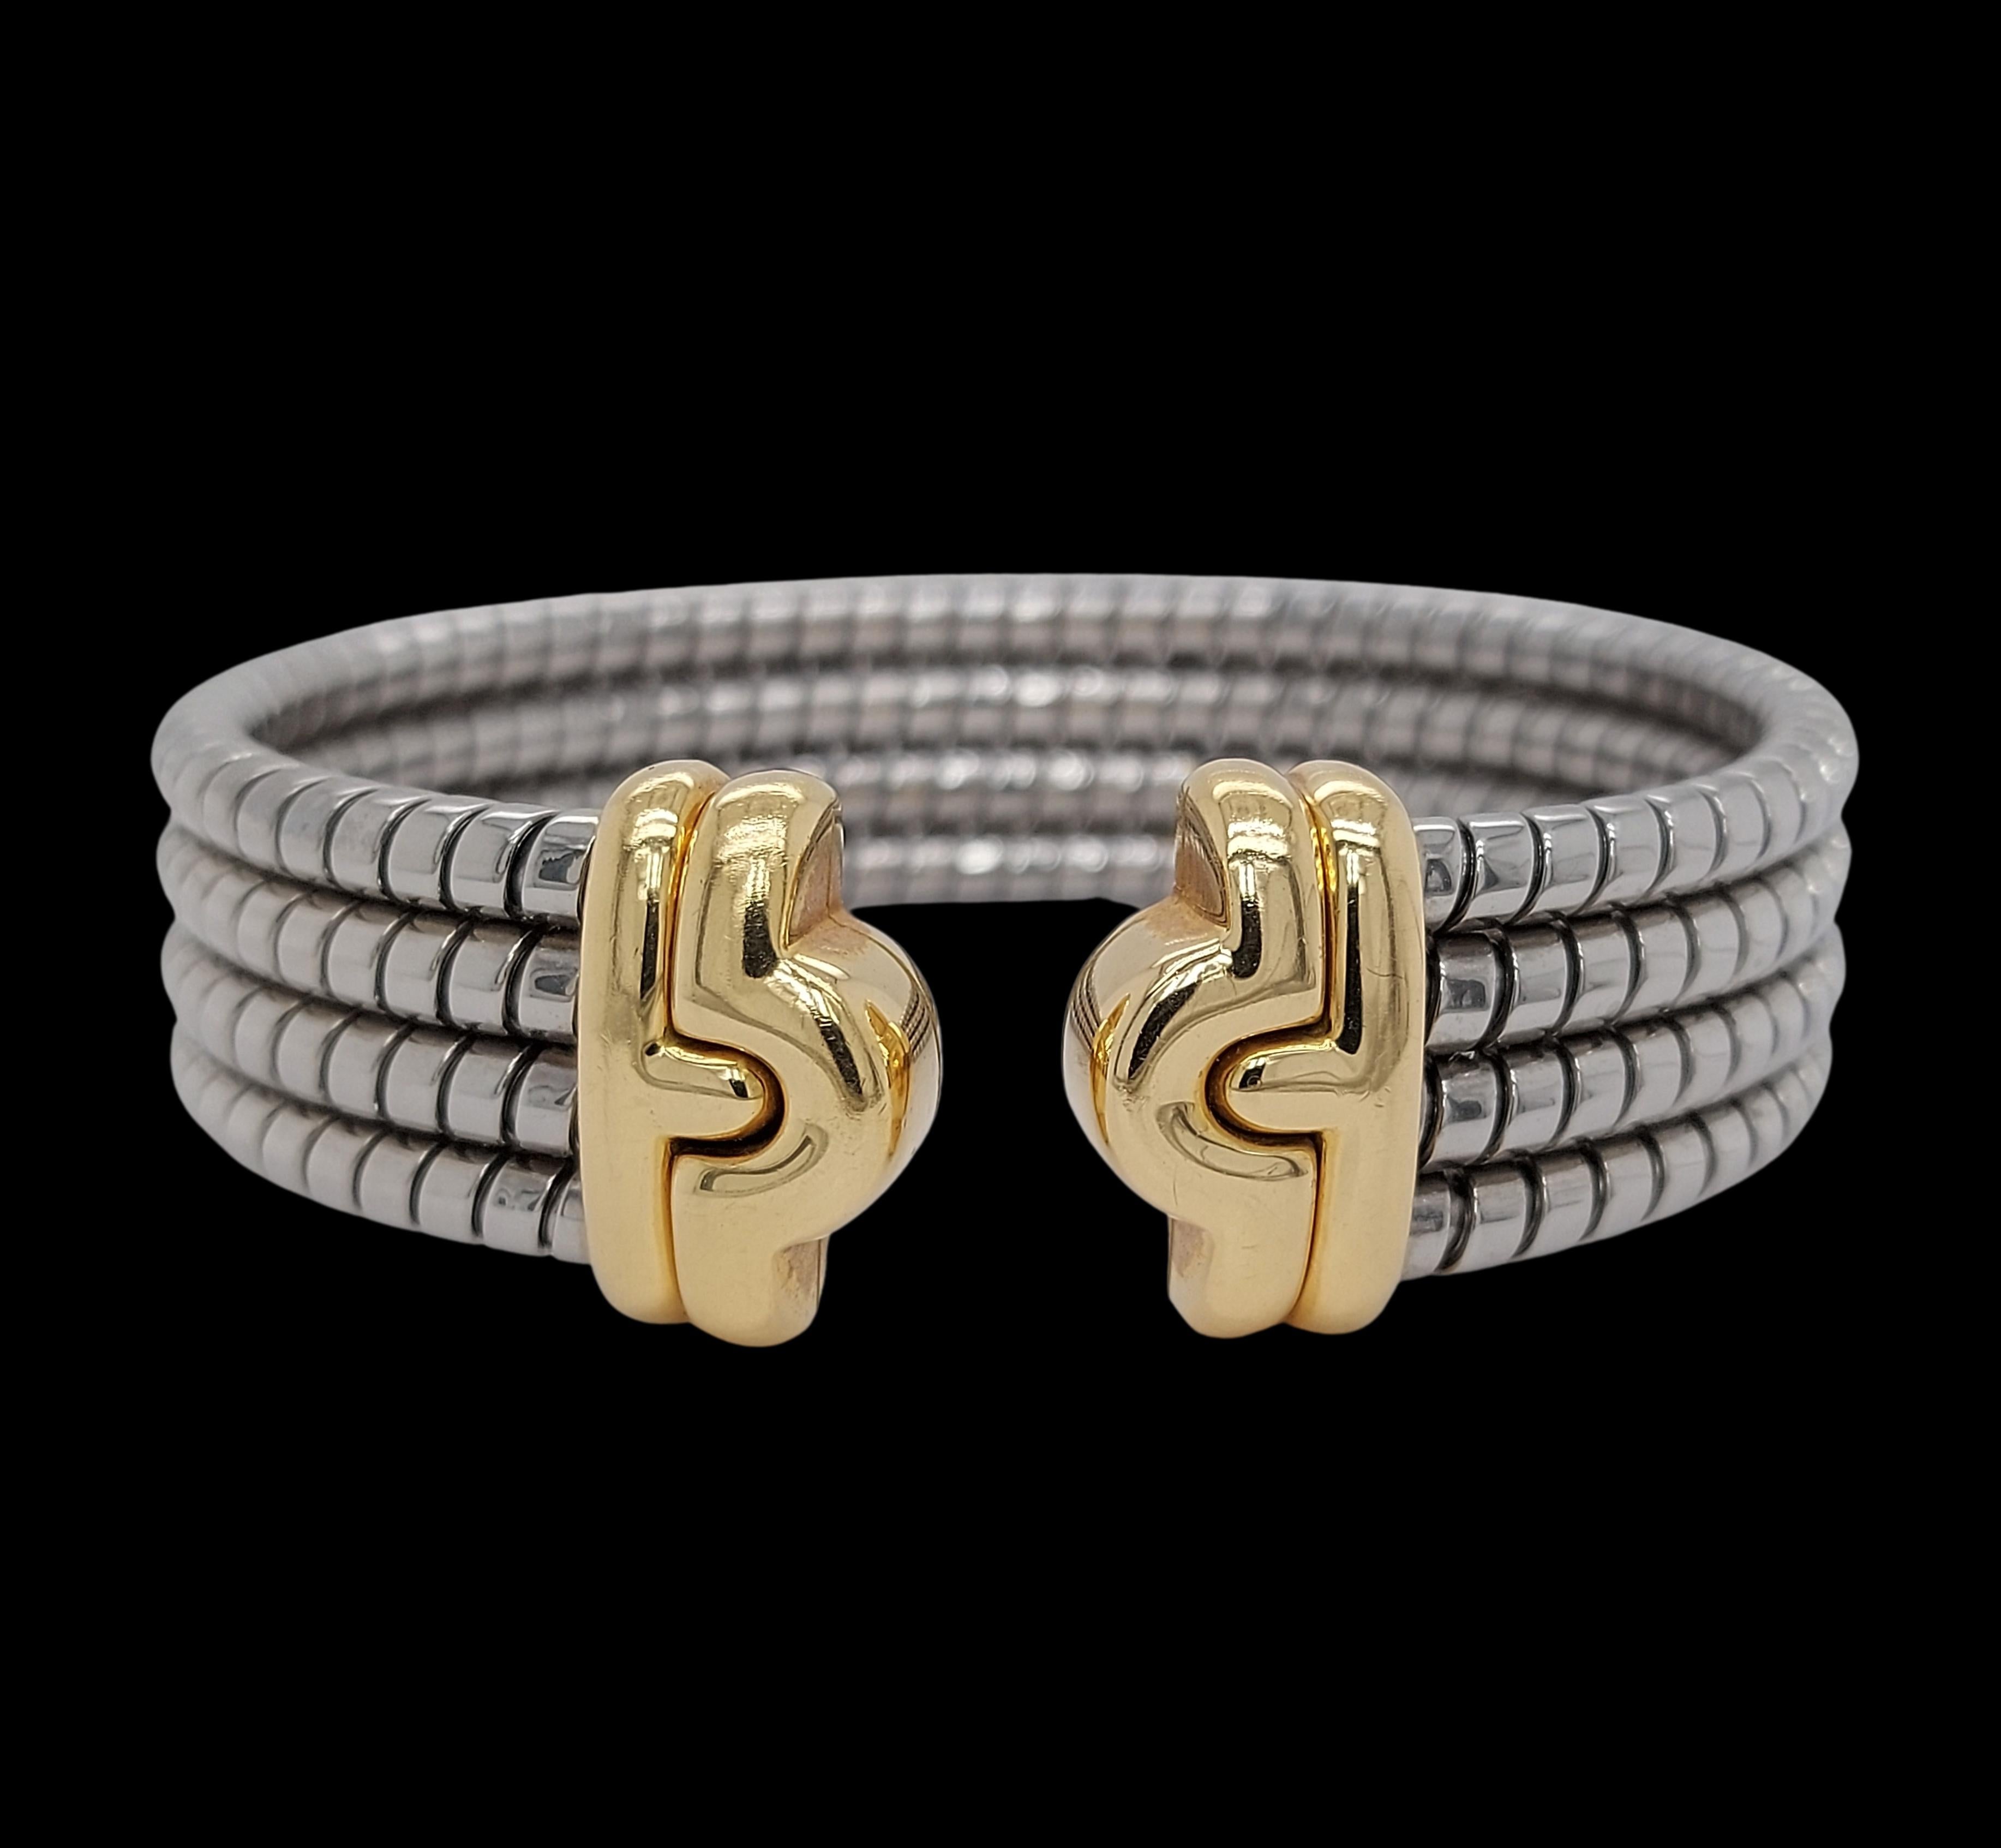 Stunning Bvlgari bracelet cuff with signature Parentesi Tubogas style. Stainless steel flexible body of the bracelet and 18k yellow gold ends.

Material: 18kt yellow gold, stainless steel

Measurements: The bracelet can fit a 17 cm wrist, but its